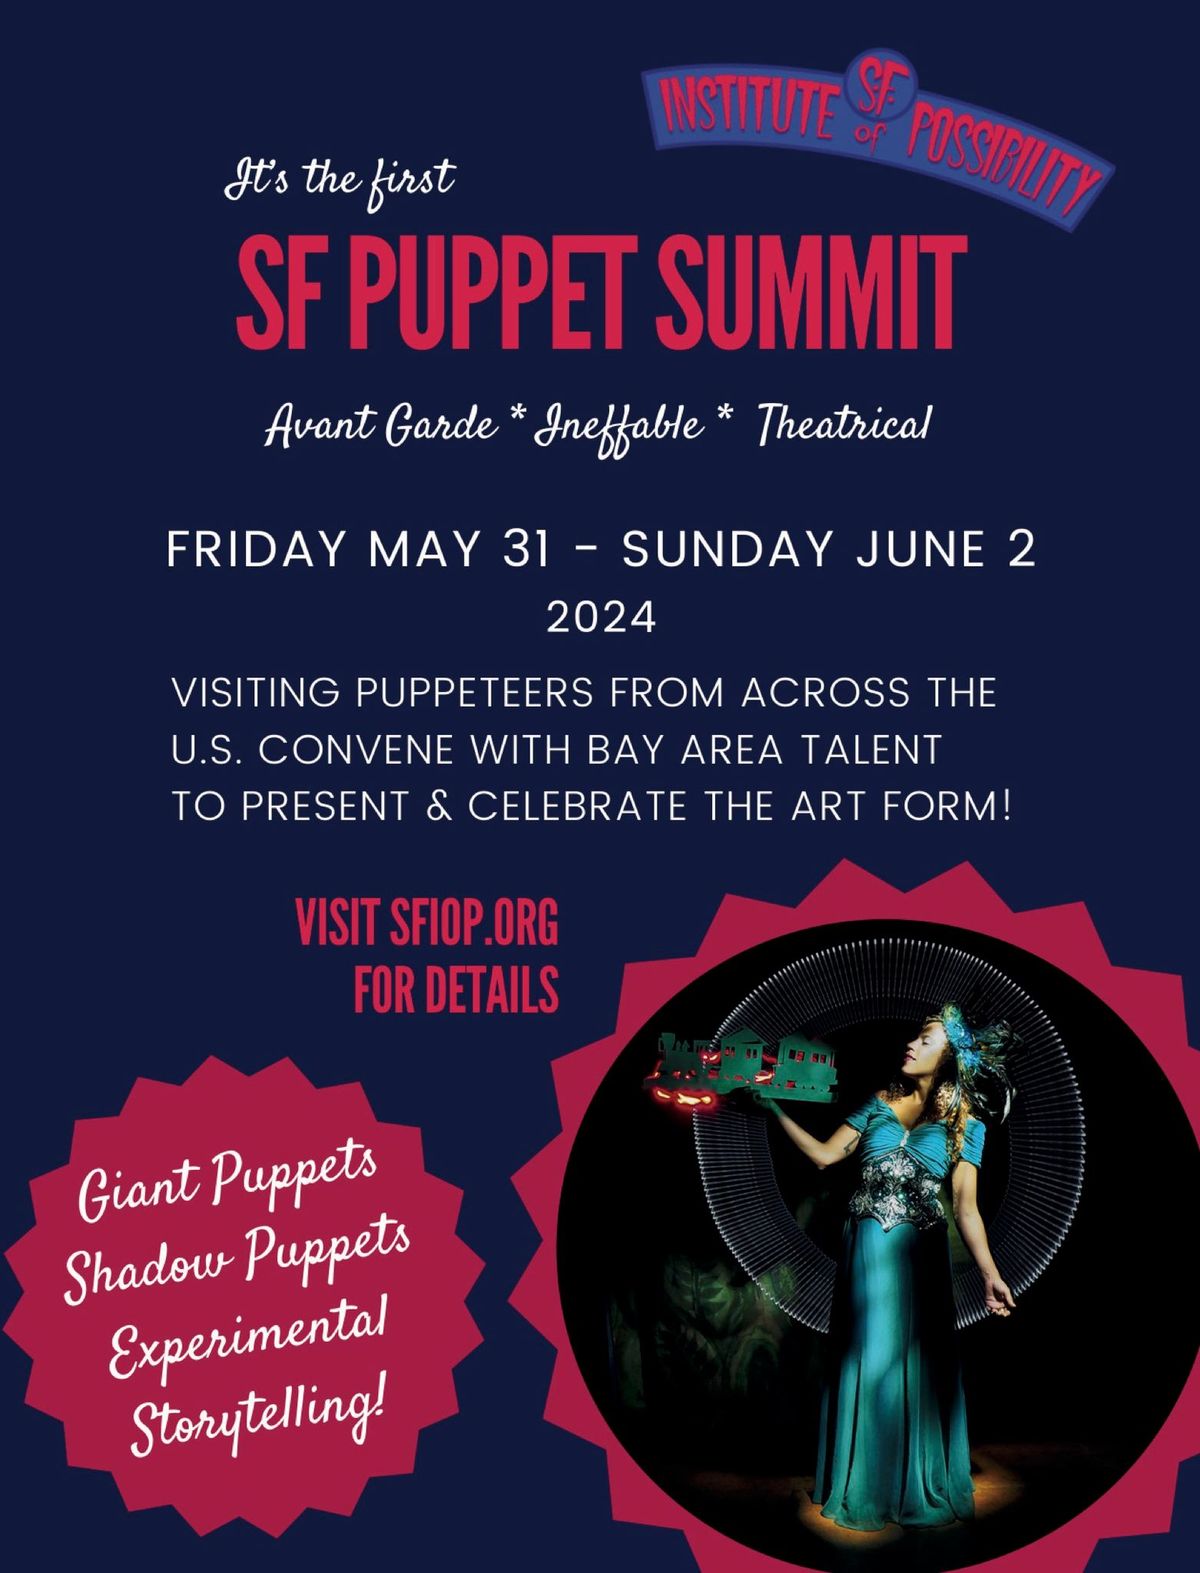 Puppet Summit! A weekend of events in SF